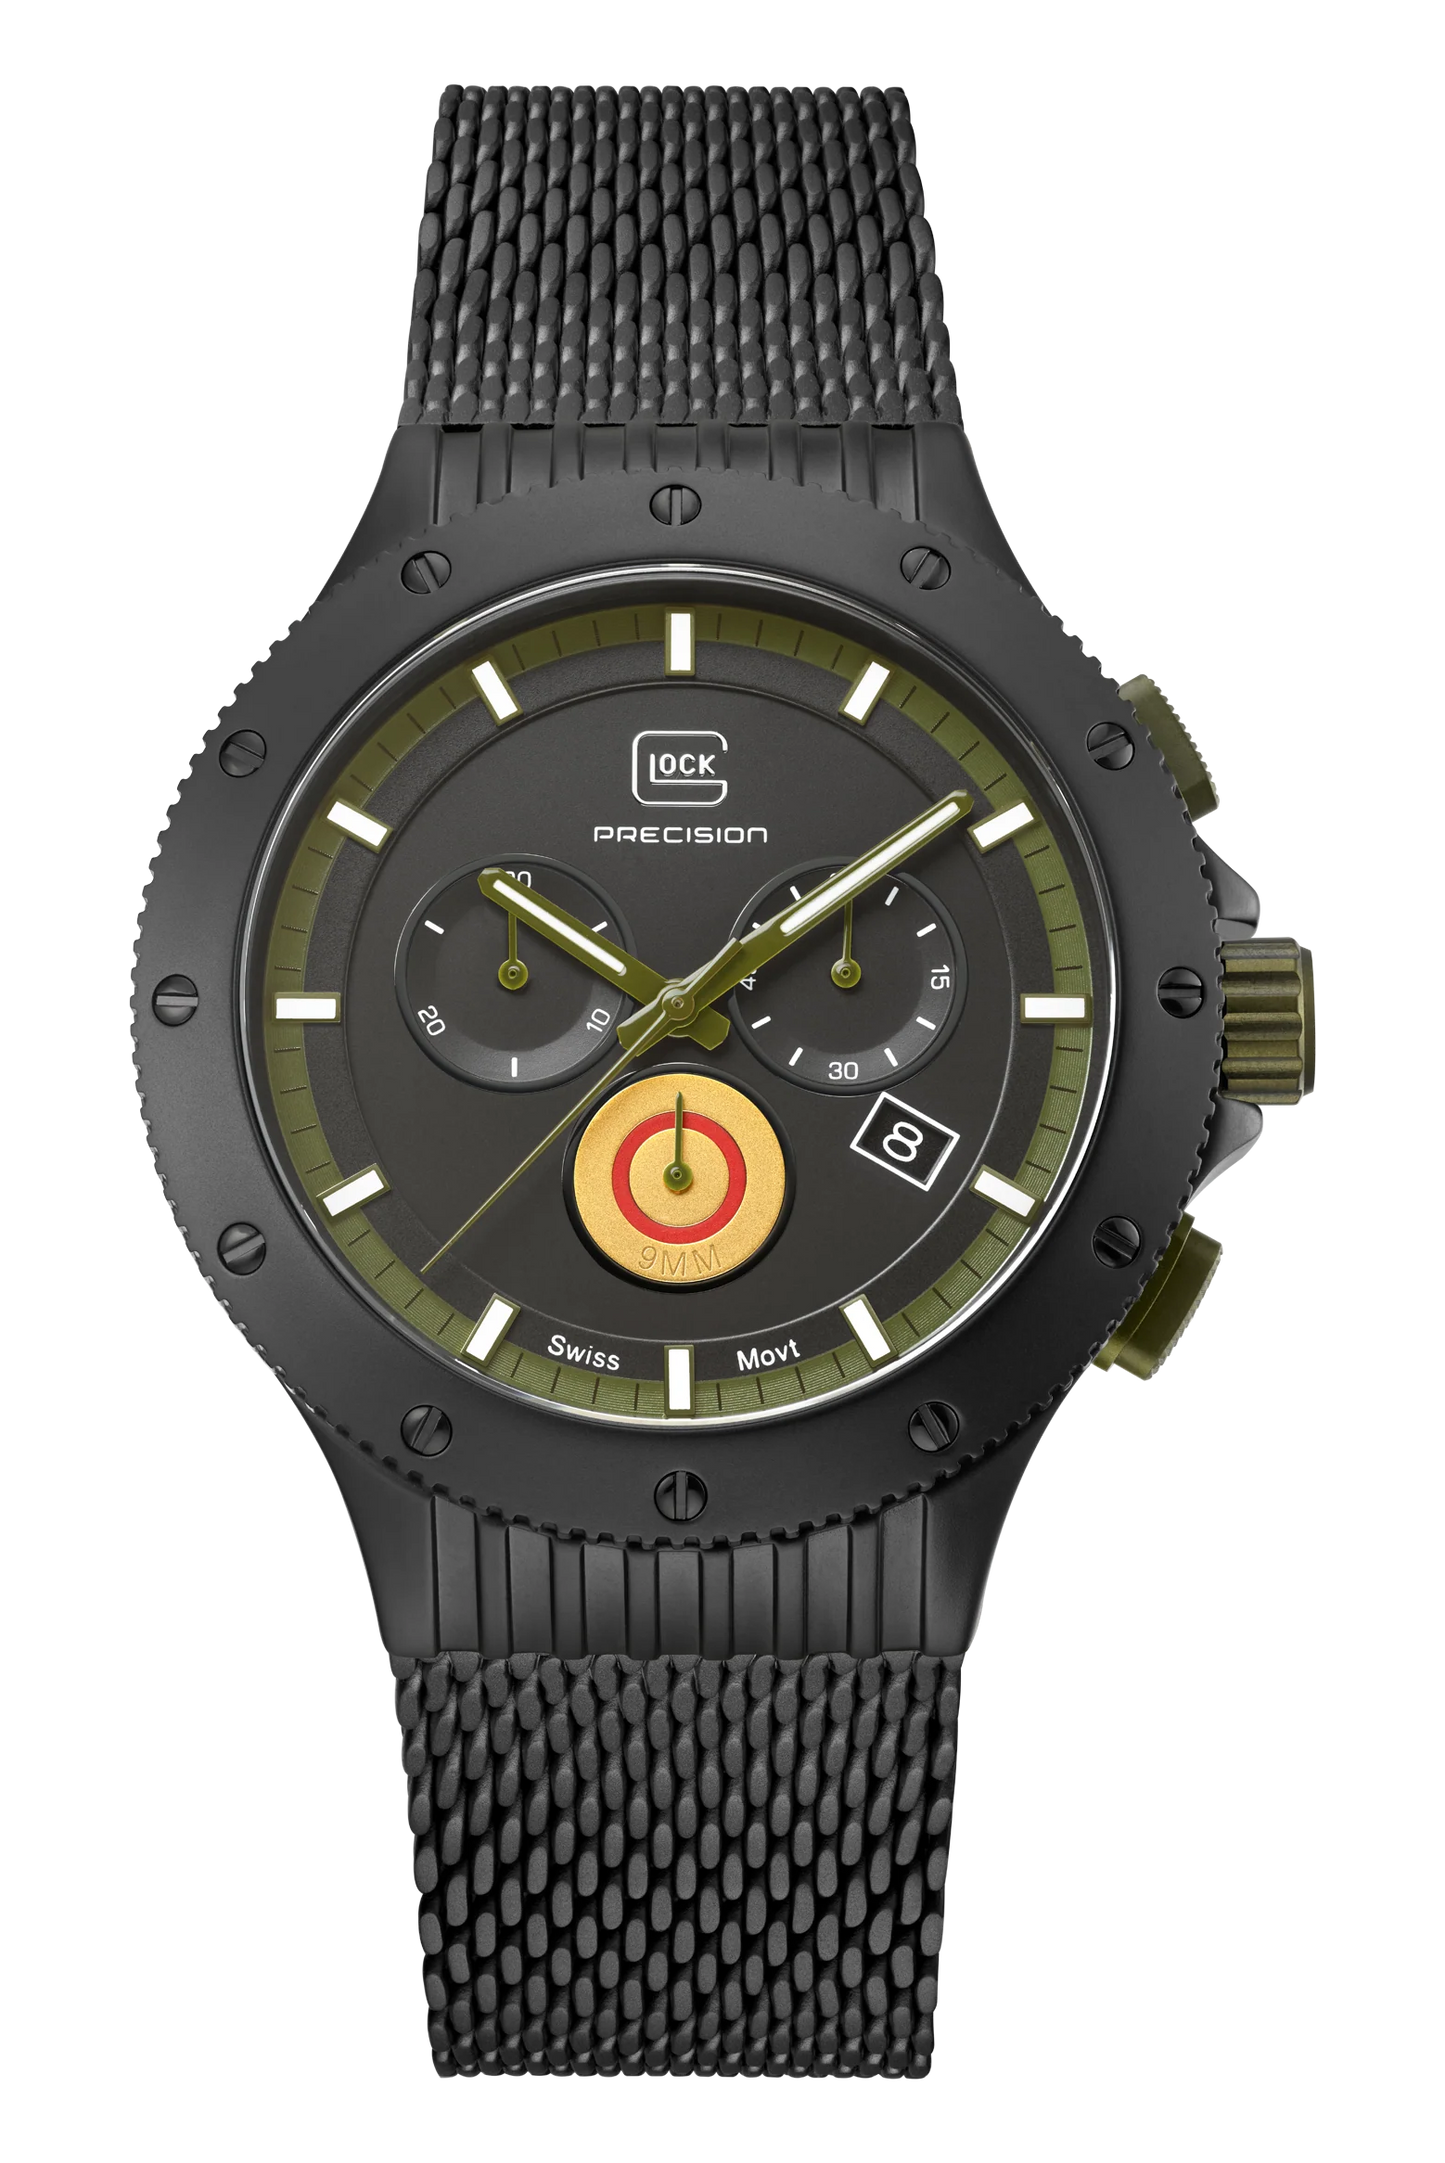 Men's Limited-Edition Glock Watch in Black/ Army Green with 2 Straps